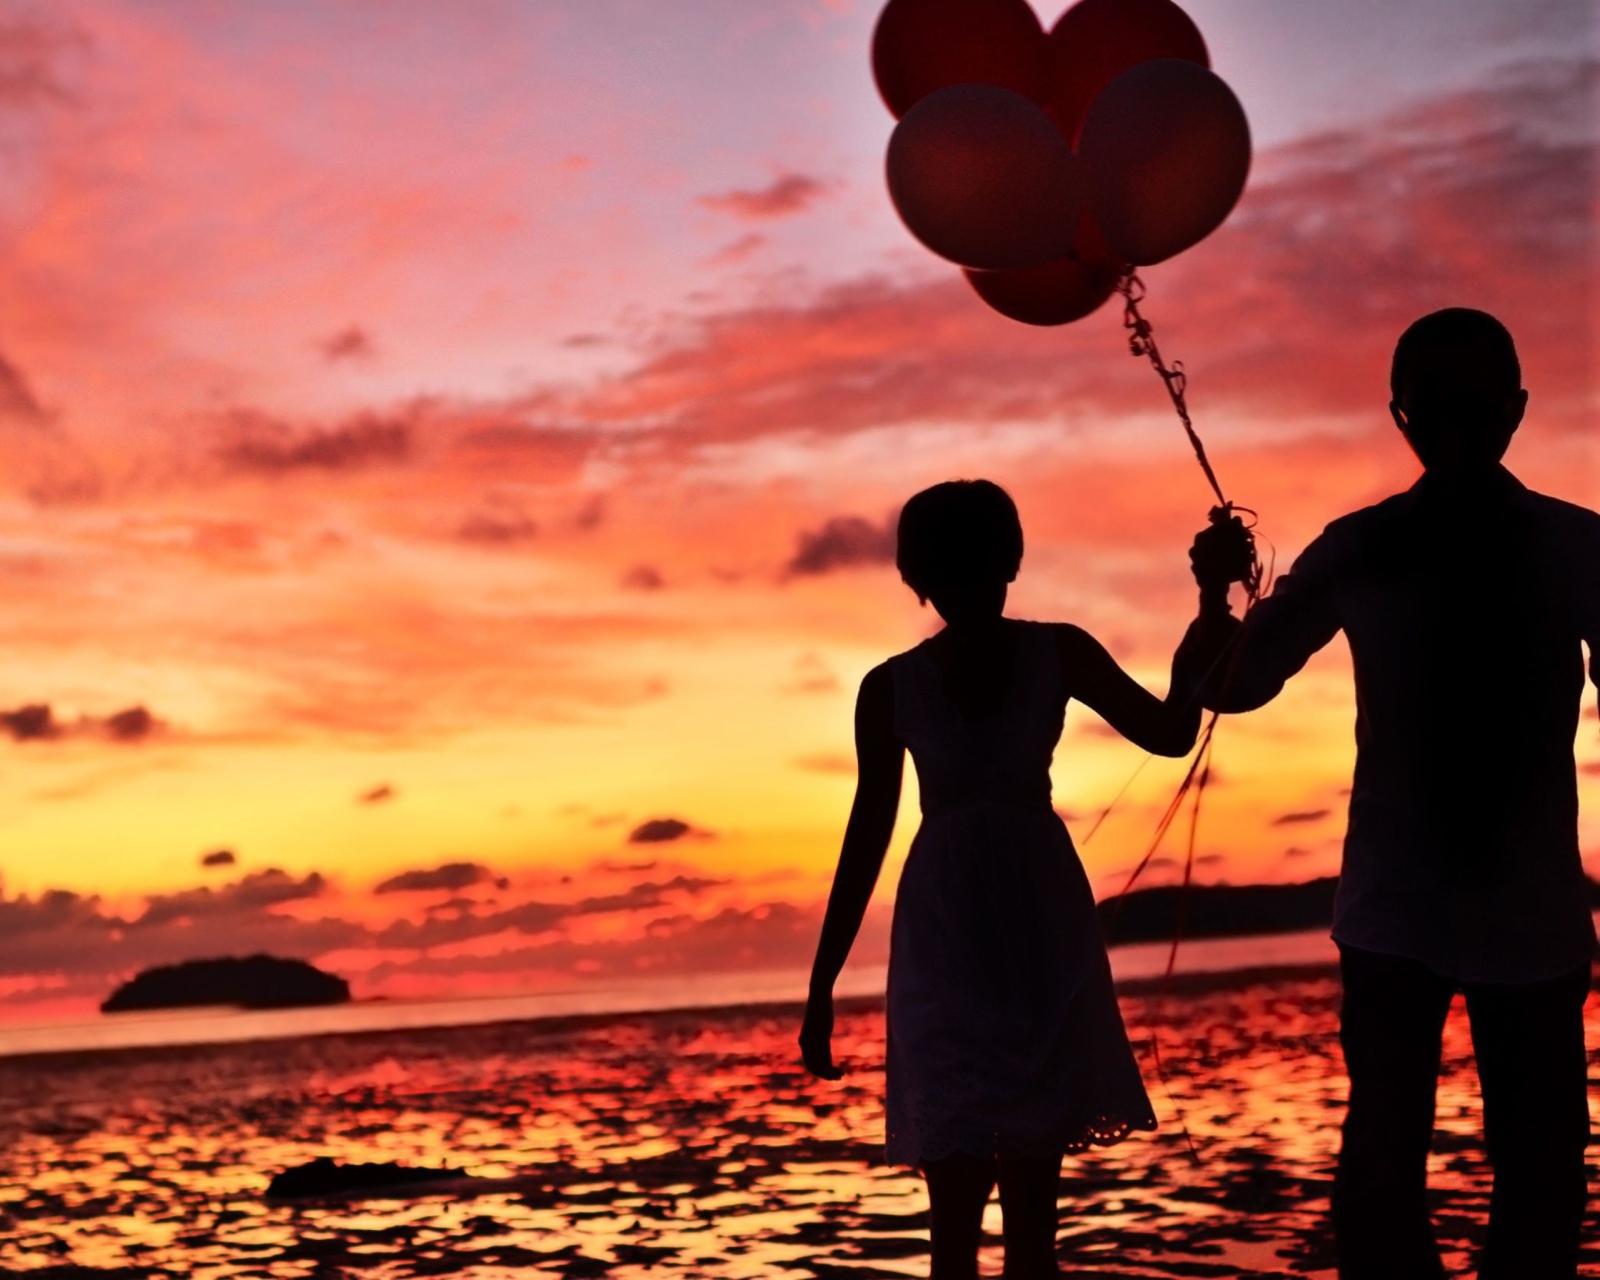 Couple With Balloons Silhouette At Sunset wallpaper 1600x1280